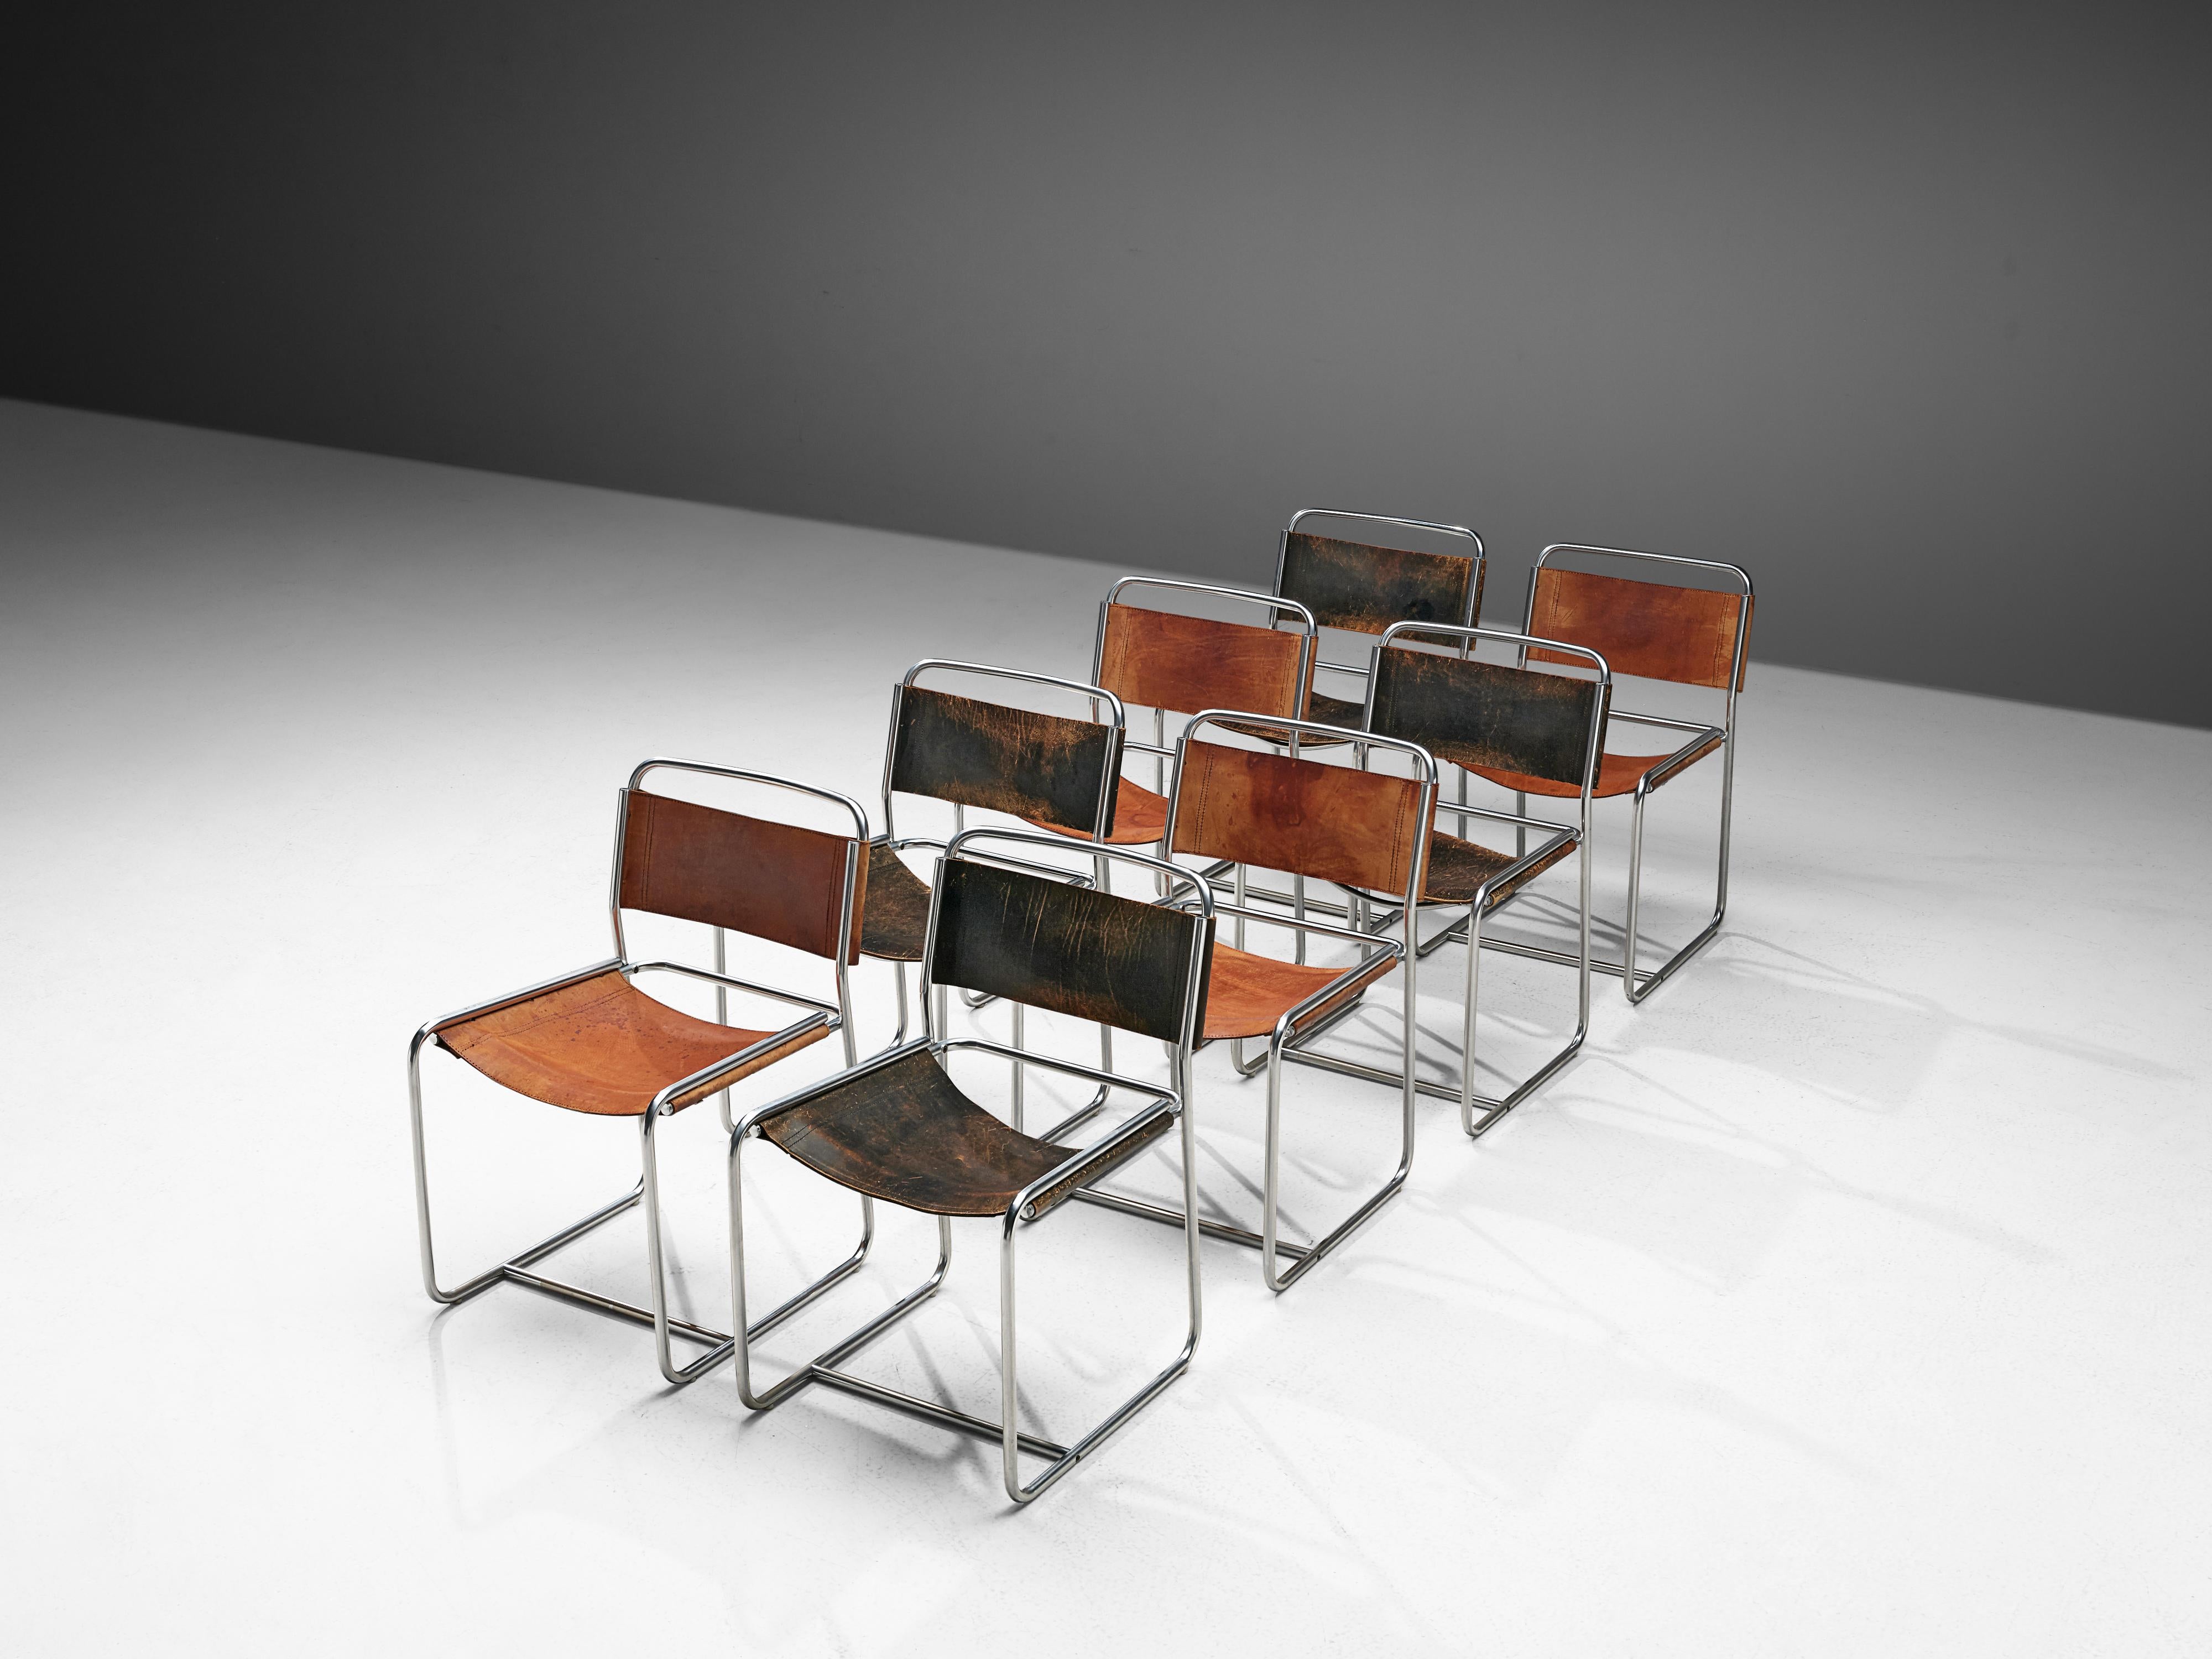 Claire Bataille and Paul Ibens for 't Spectrum, dining chairs, metal and leather, Netherlands, 1971. 

Eight tubular chairs with four with natural and four with black saddle leather seating and back. The frame consist of thin tubular steel formed